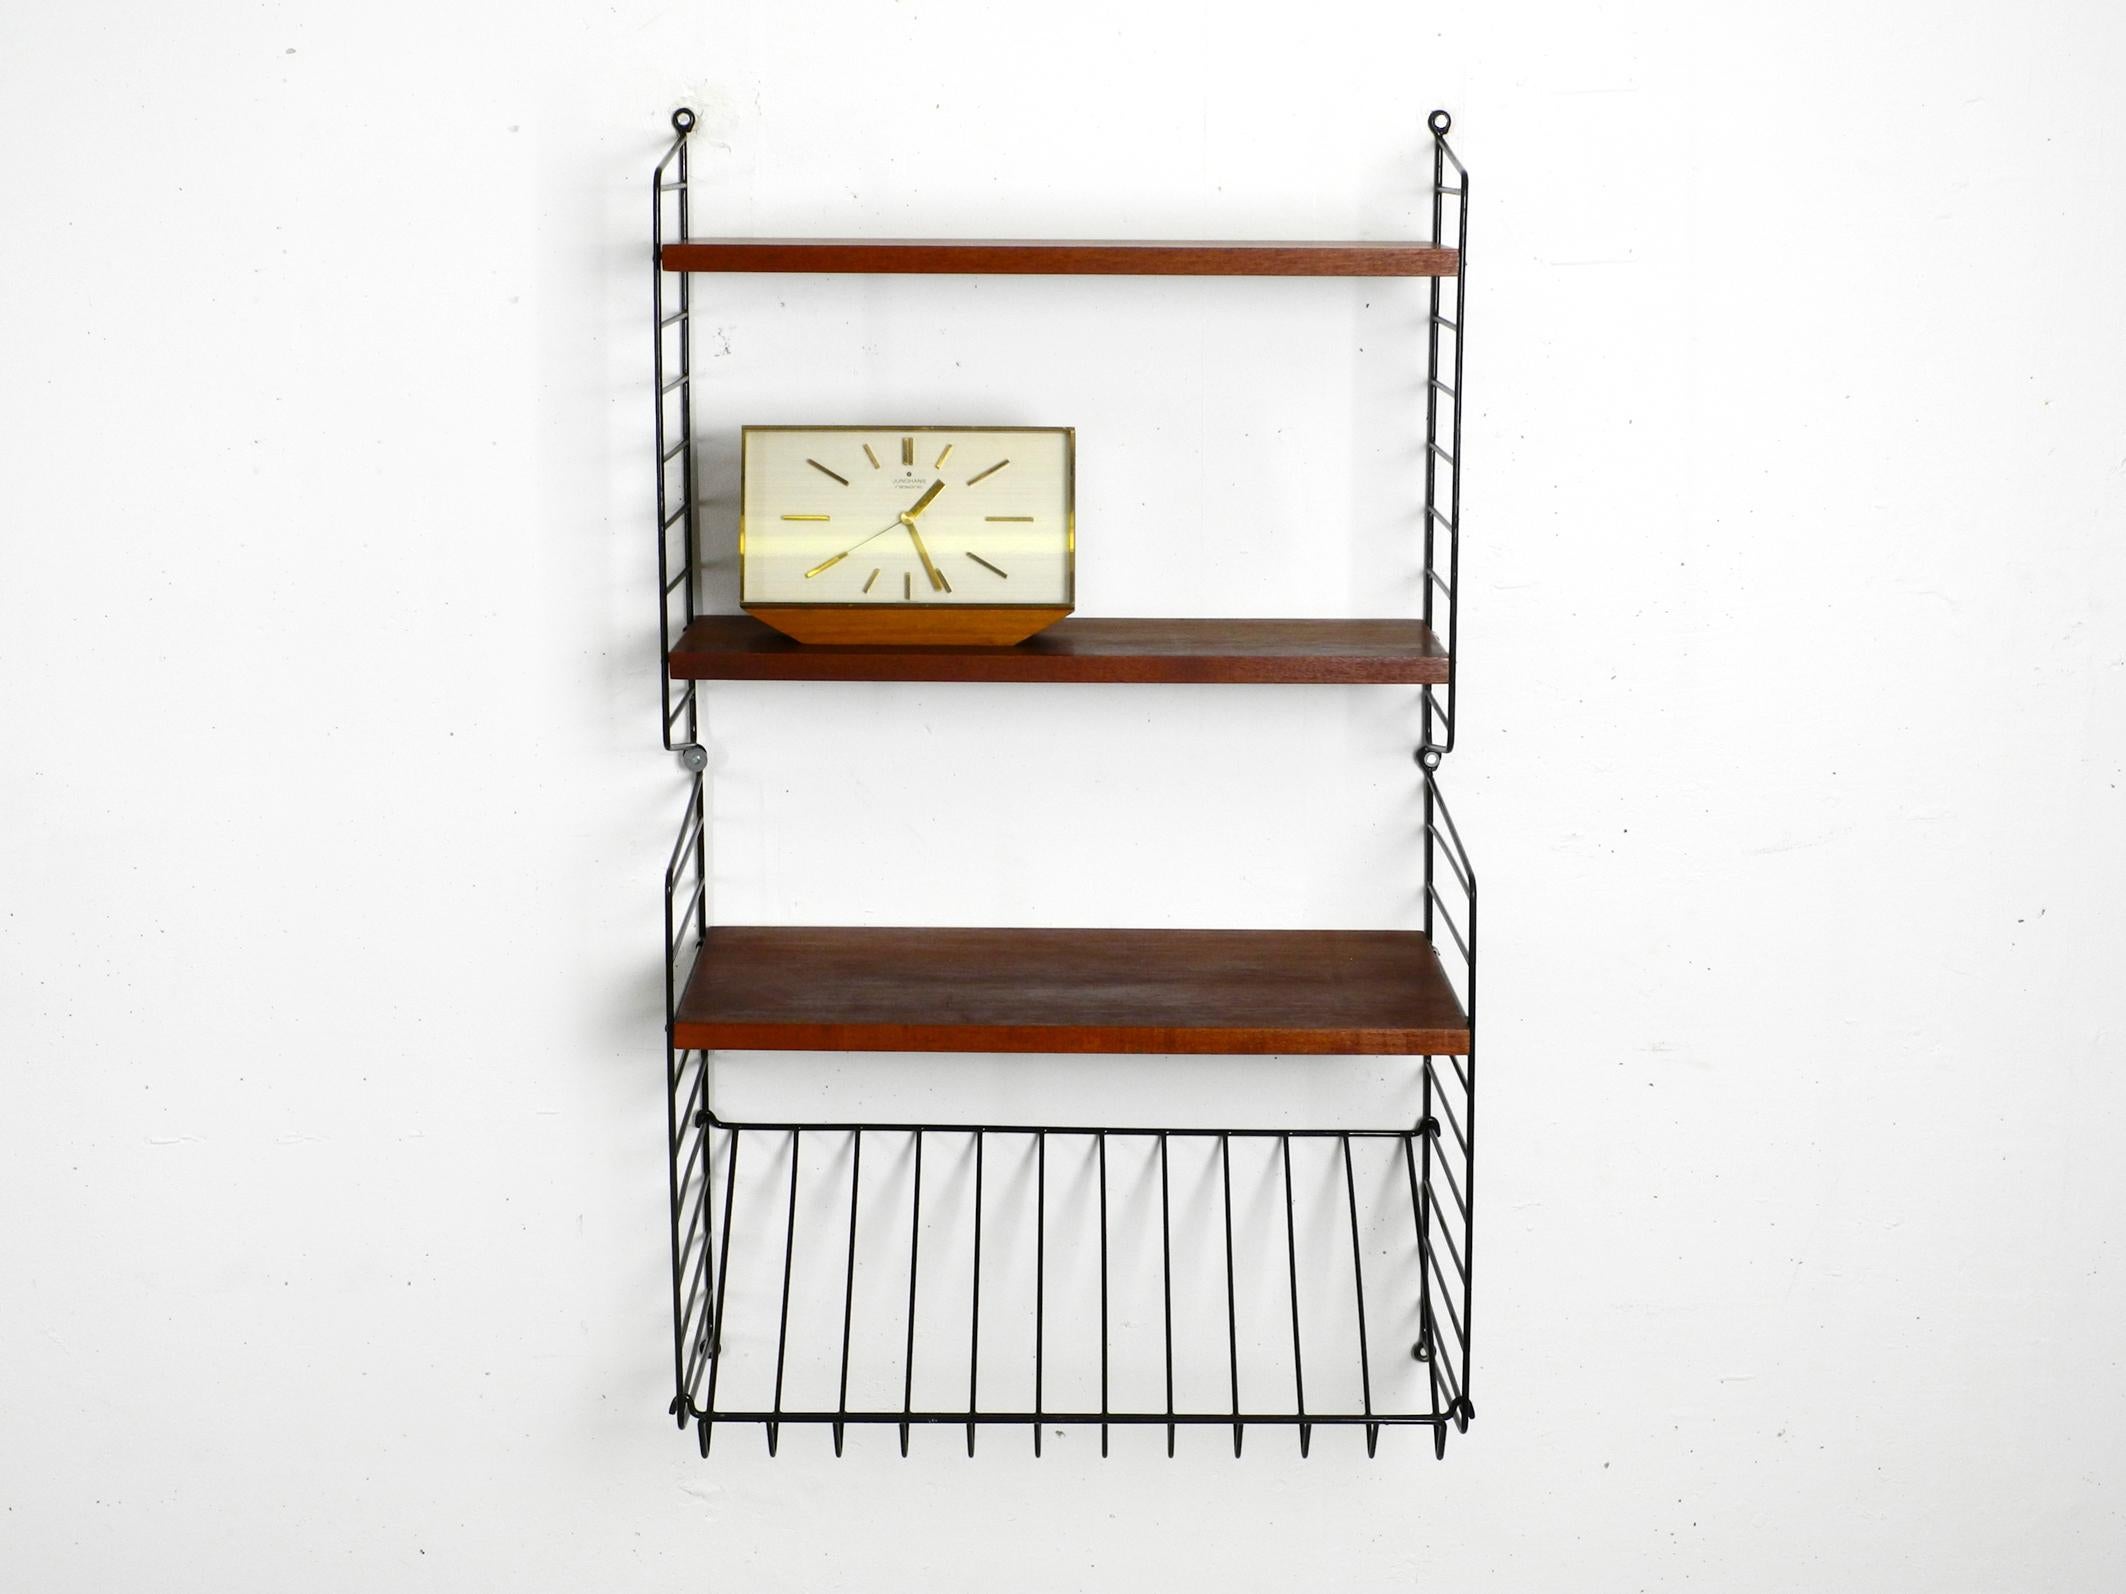 Original 1960s Nisse Strinning wall hanging shelf.
Three narrow solid wood floors with dark teak veneer.
Two ladders are 20 cm deep and have two 20 cm deep shelves.
Two ladders have a depth of 30 cm and come with one shelf with a depth of 30 cm and